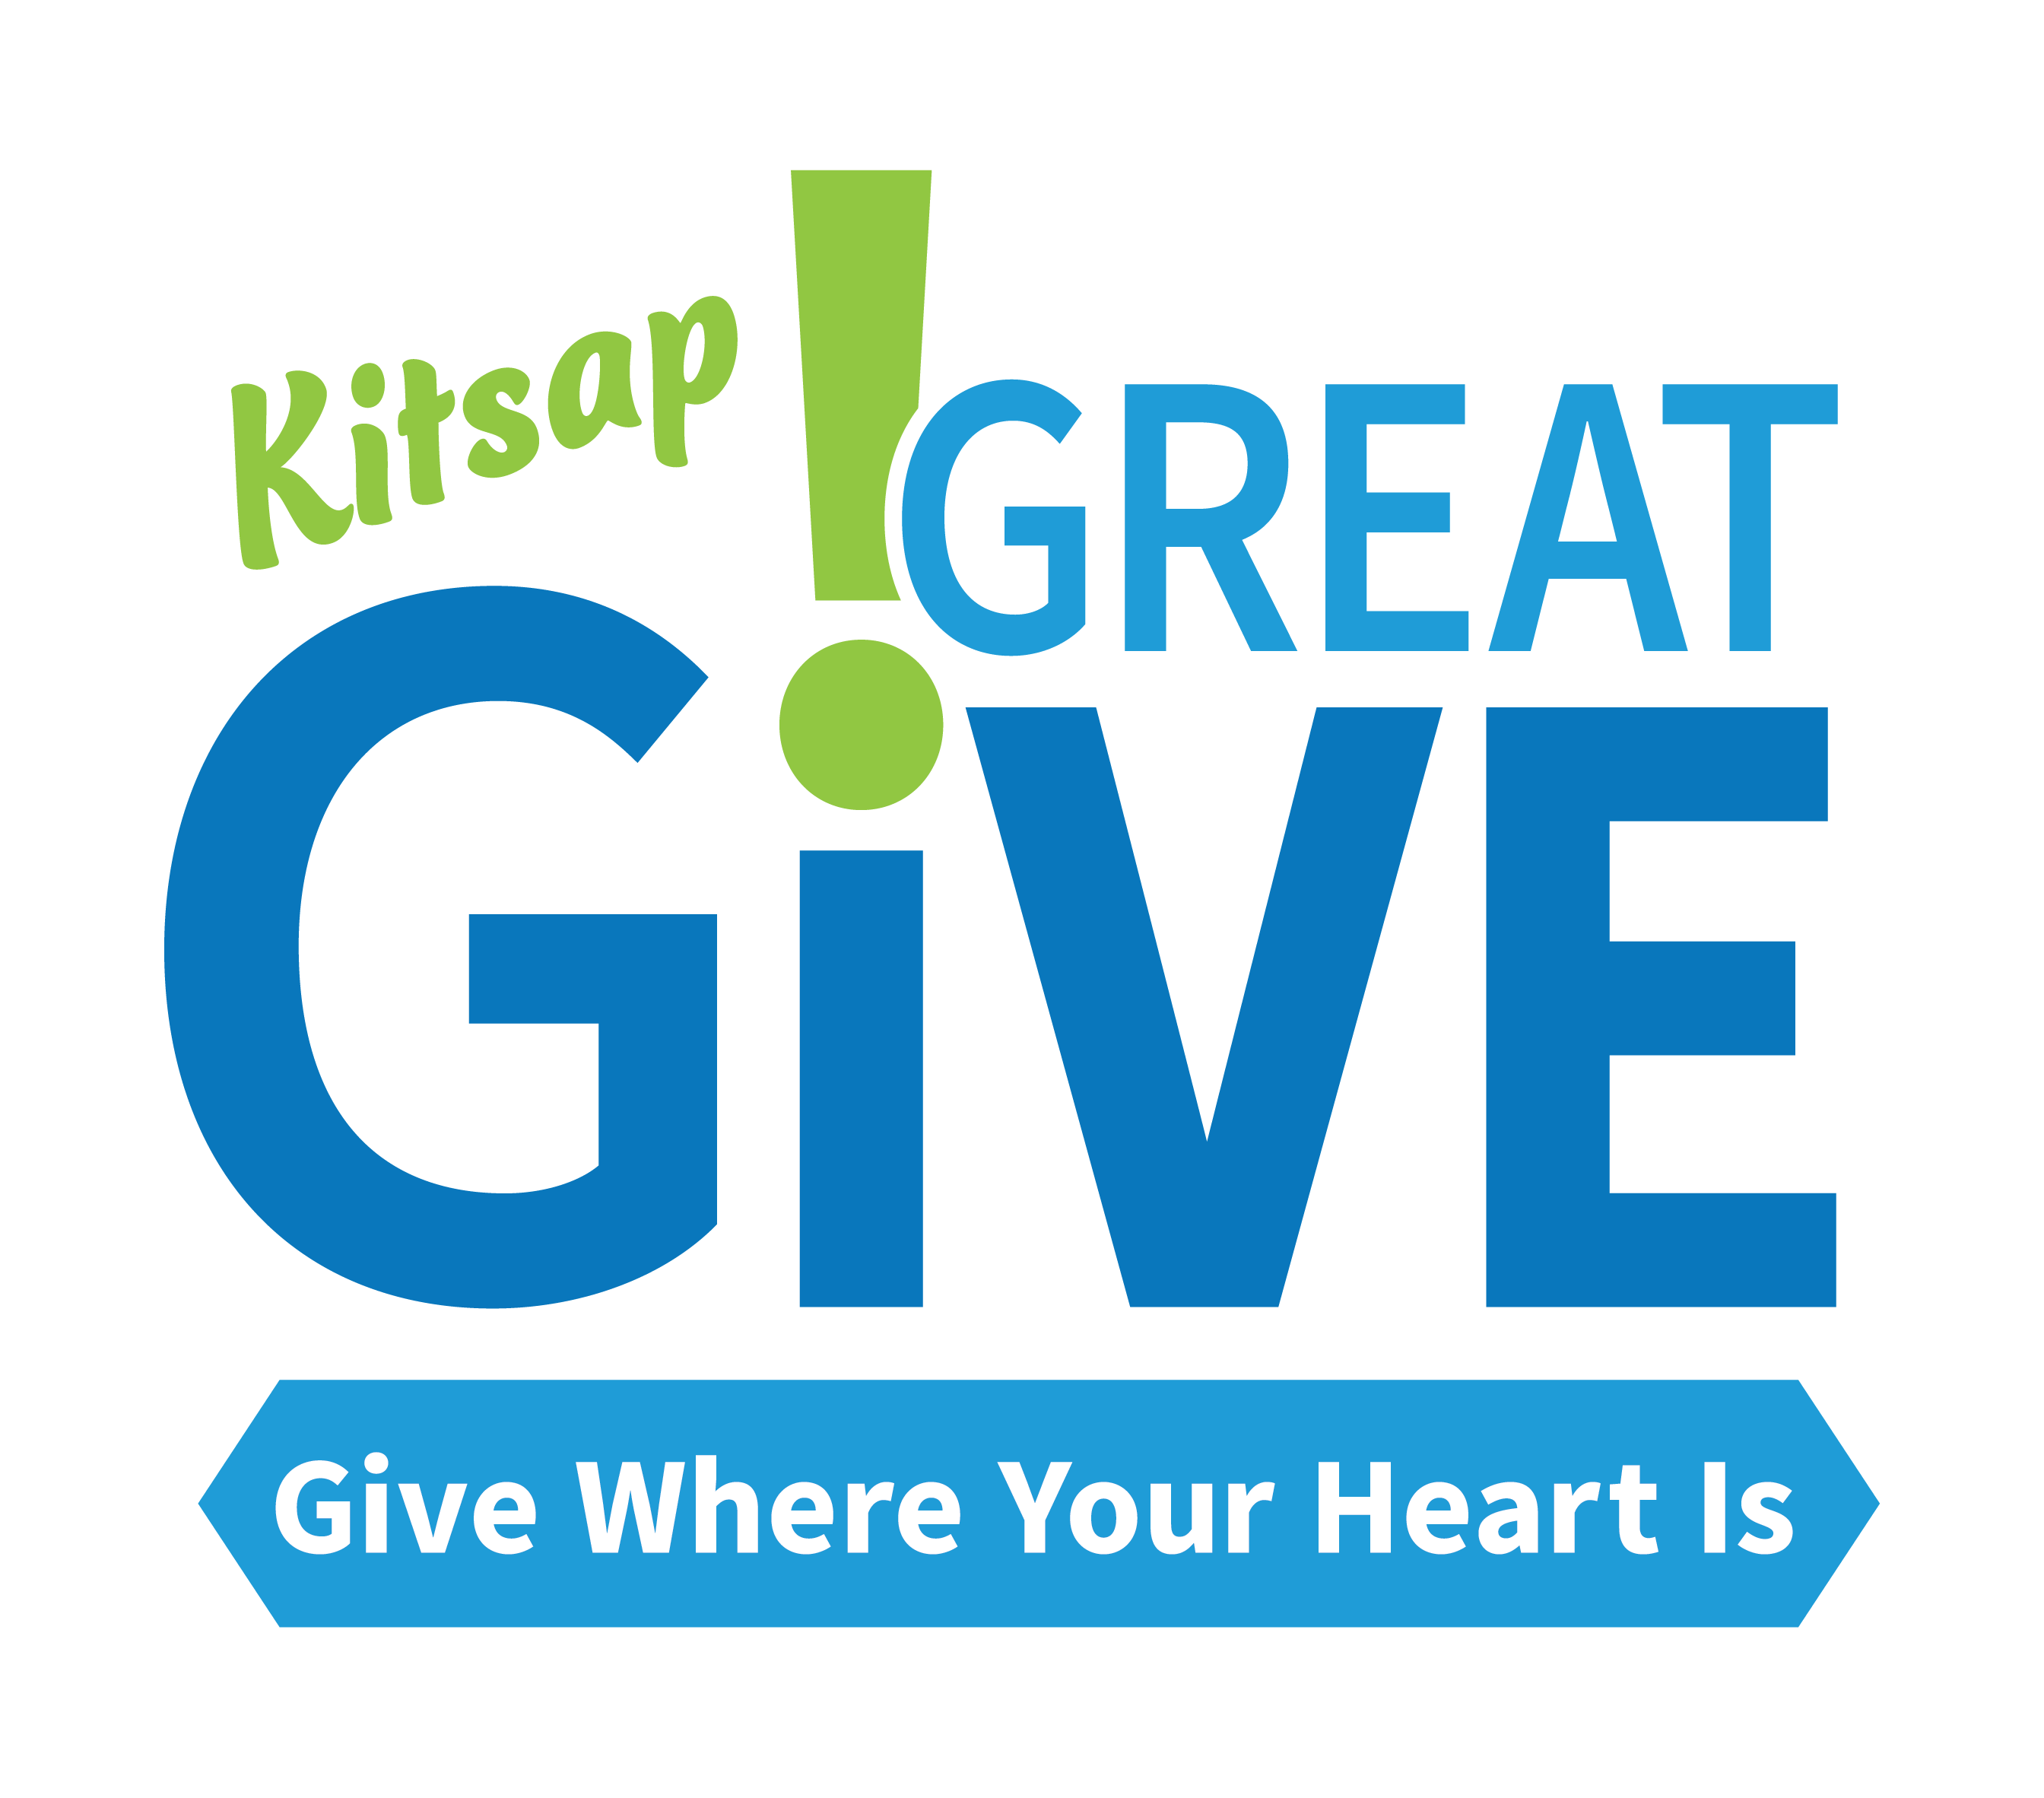 Kitsap Great Give, Give Where Your Heart Is